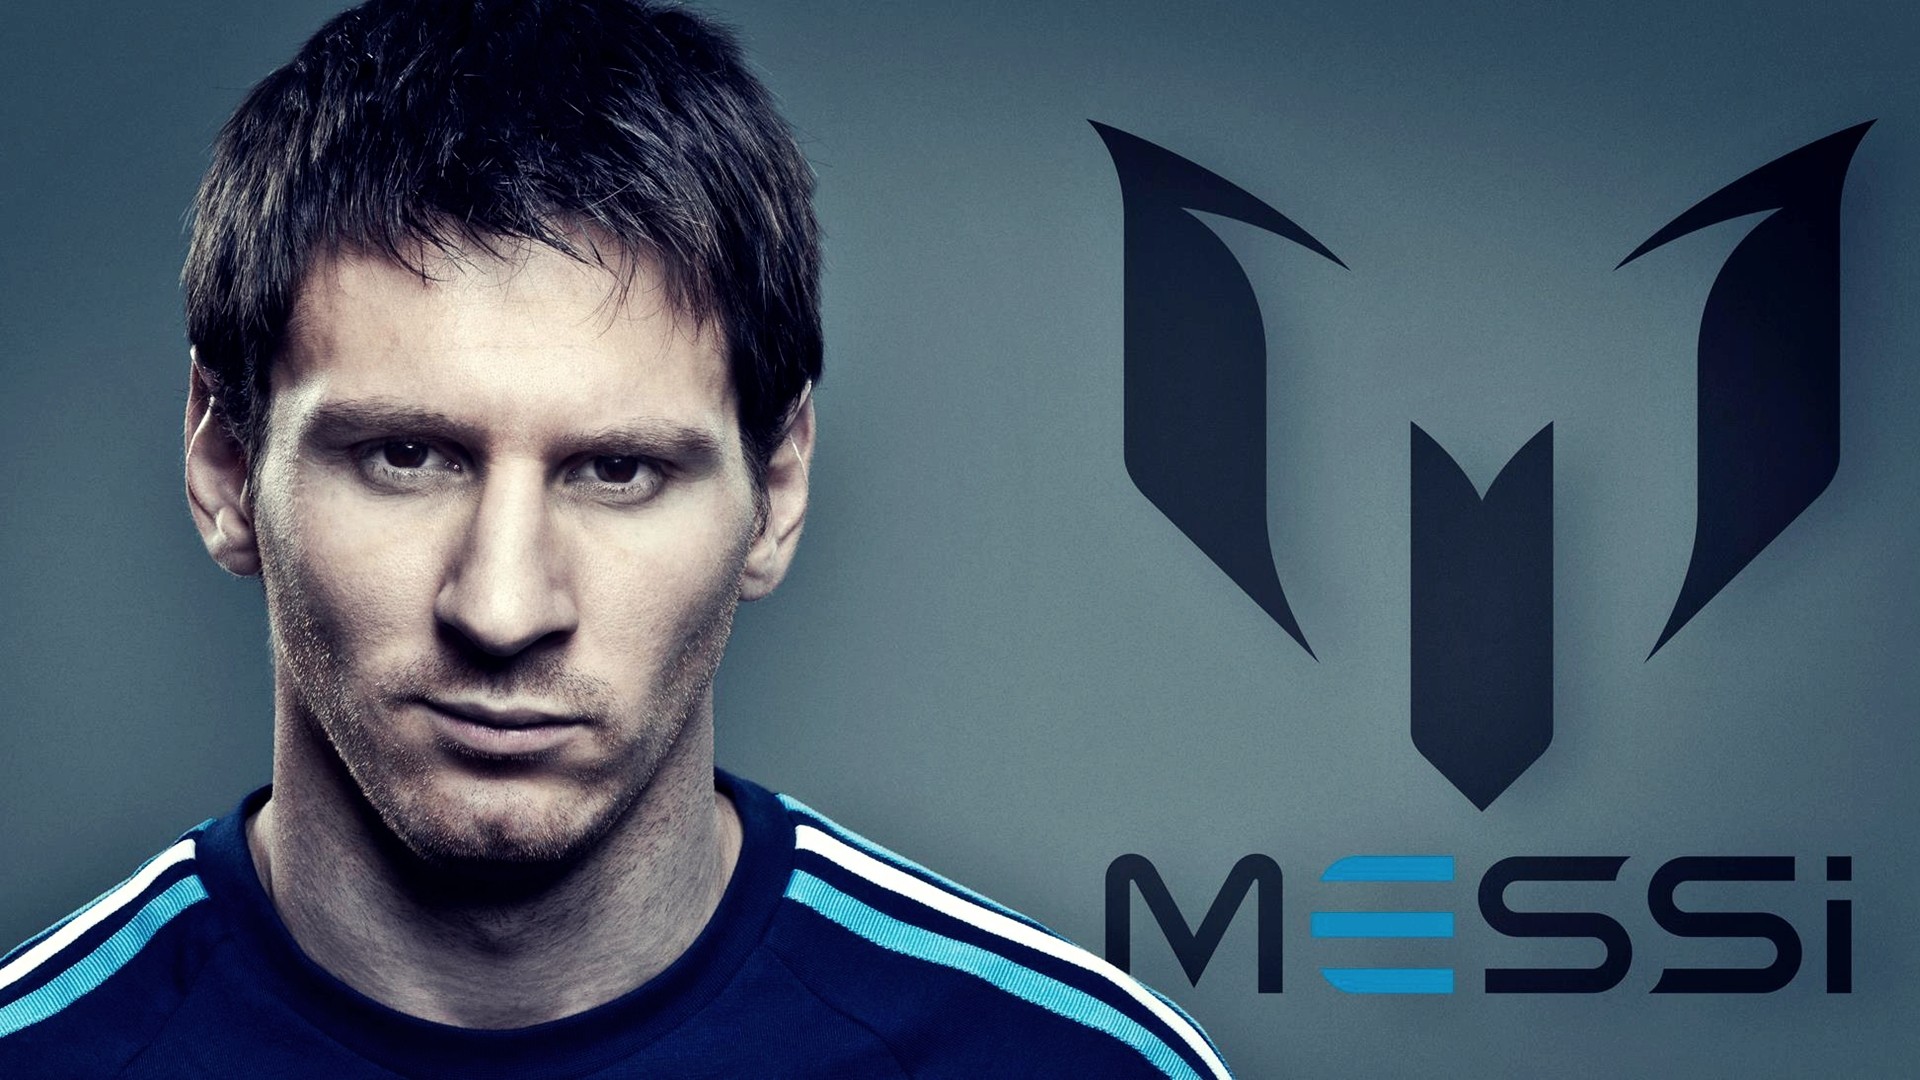 Lionel Messi Football Player Wallpaper